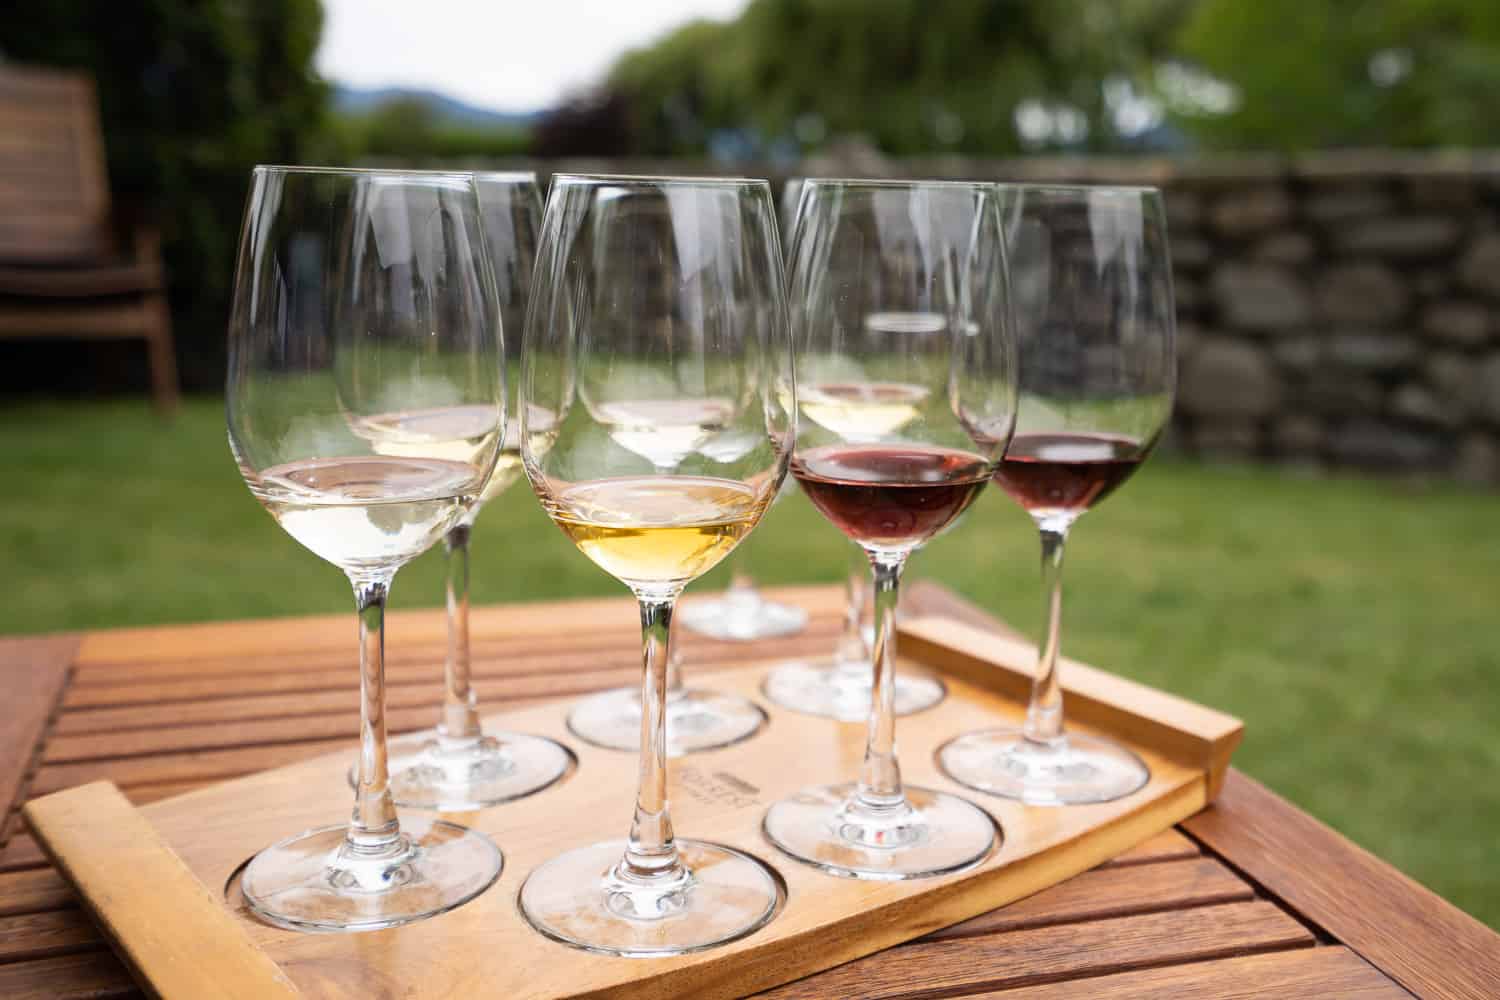 Seven glasses in the wine tasting at Forrest winery on the Marlborough Wine Trail